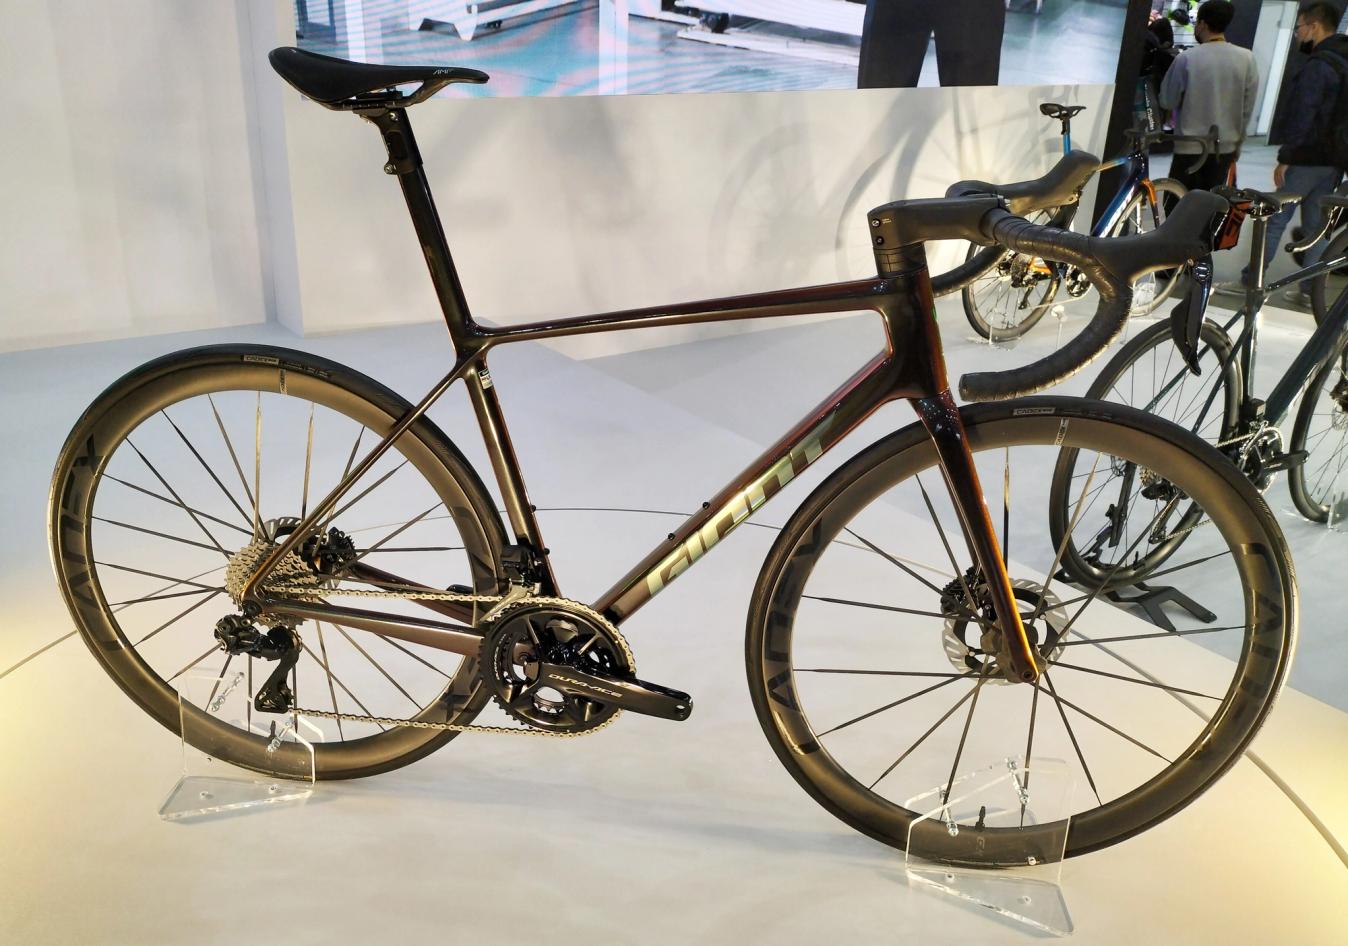 There were some new bikes on show too, including the Giant TCR which stole the limelight on the opening day